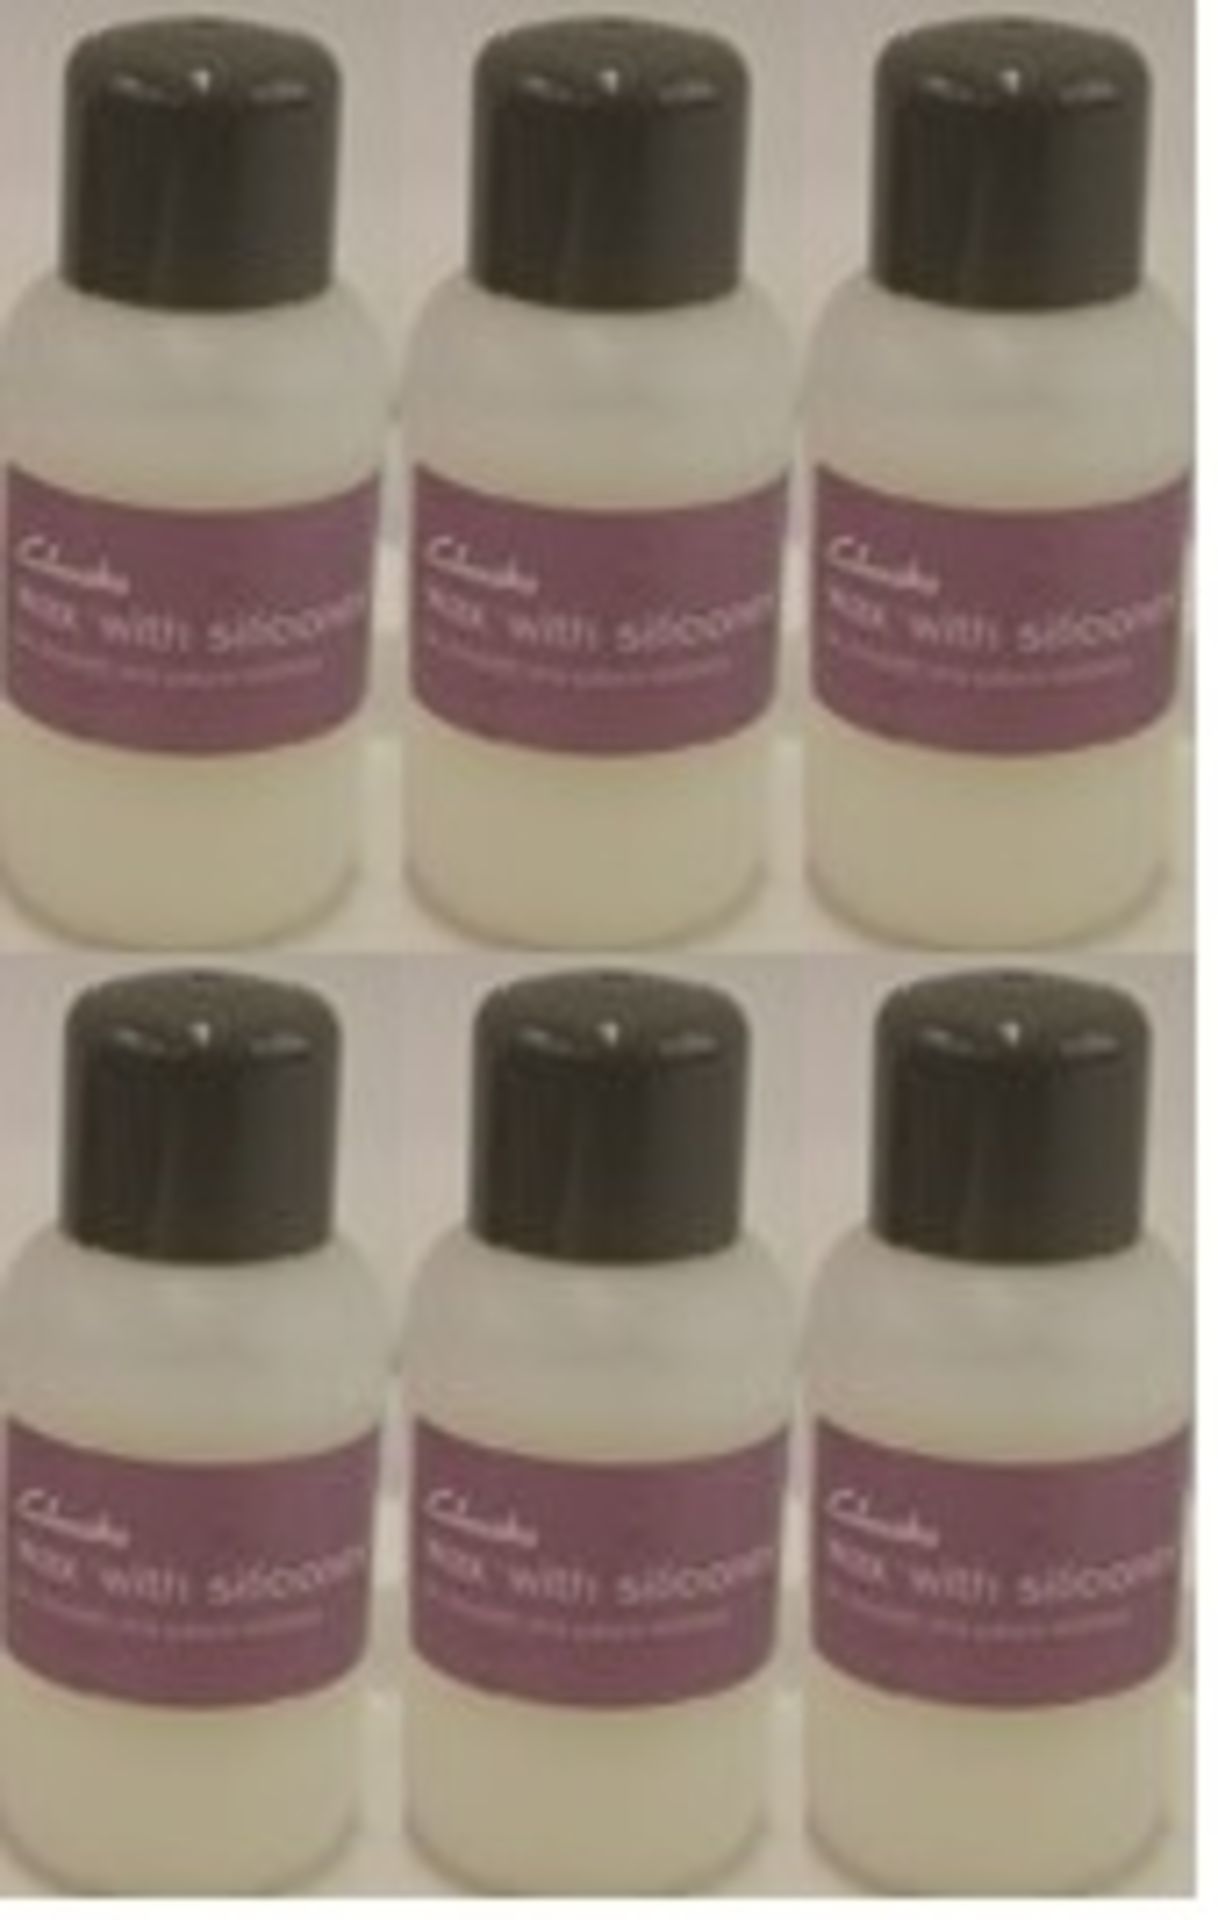 + VAT Brand New Six Bottles Of 100ml Clarks Wax With Silicones For Smooth & Patent Leather ISP £